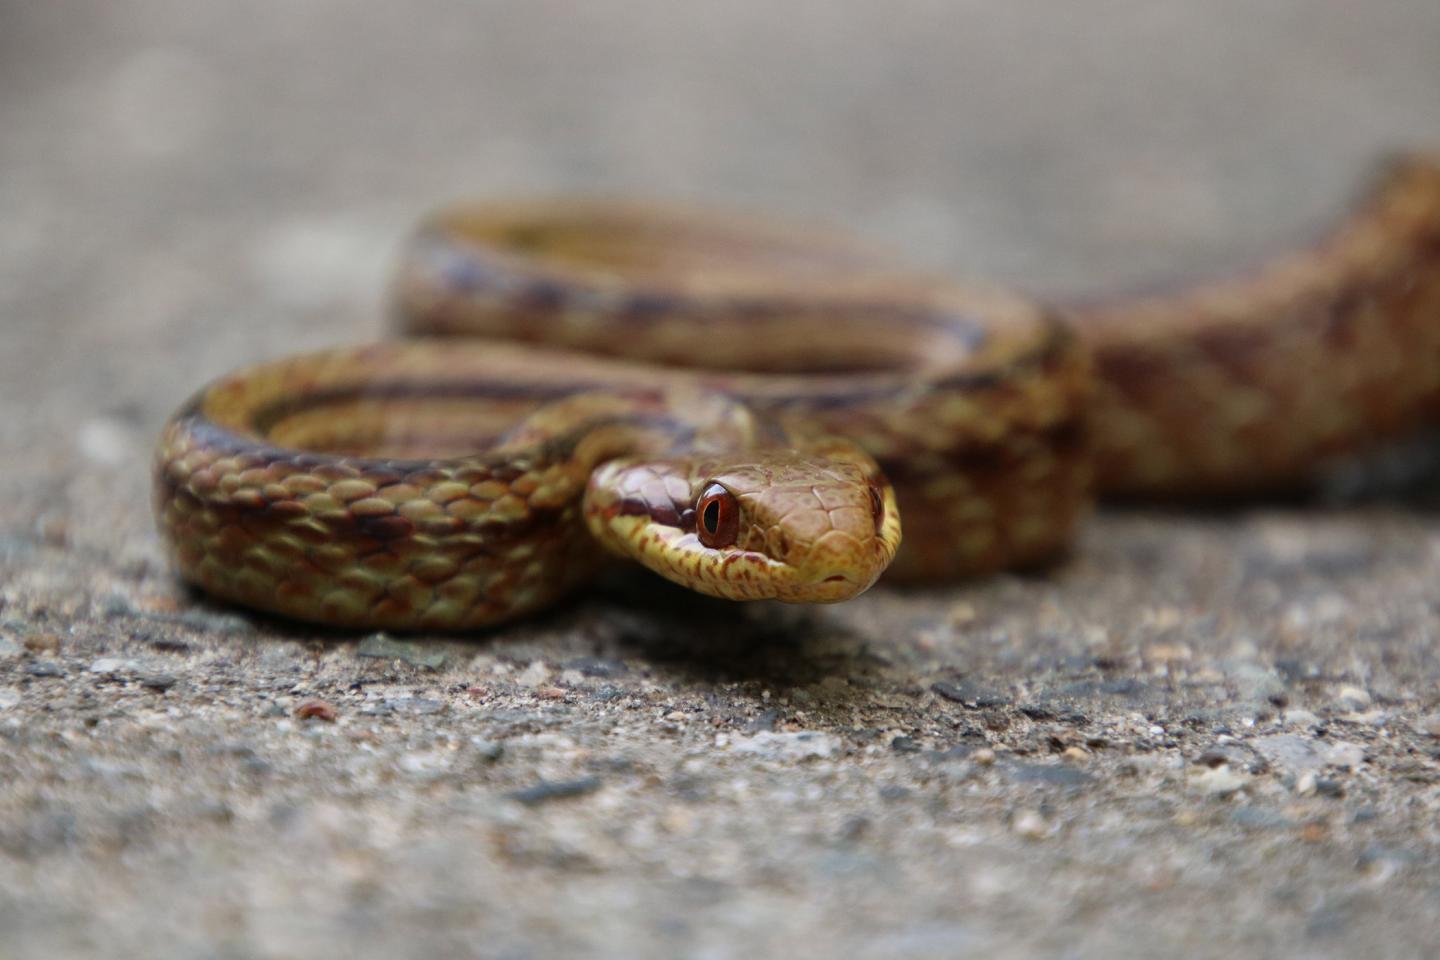 A Japanese rat snake crossing a rural road in the Fukushima evacuation zone in Japan